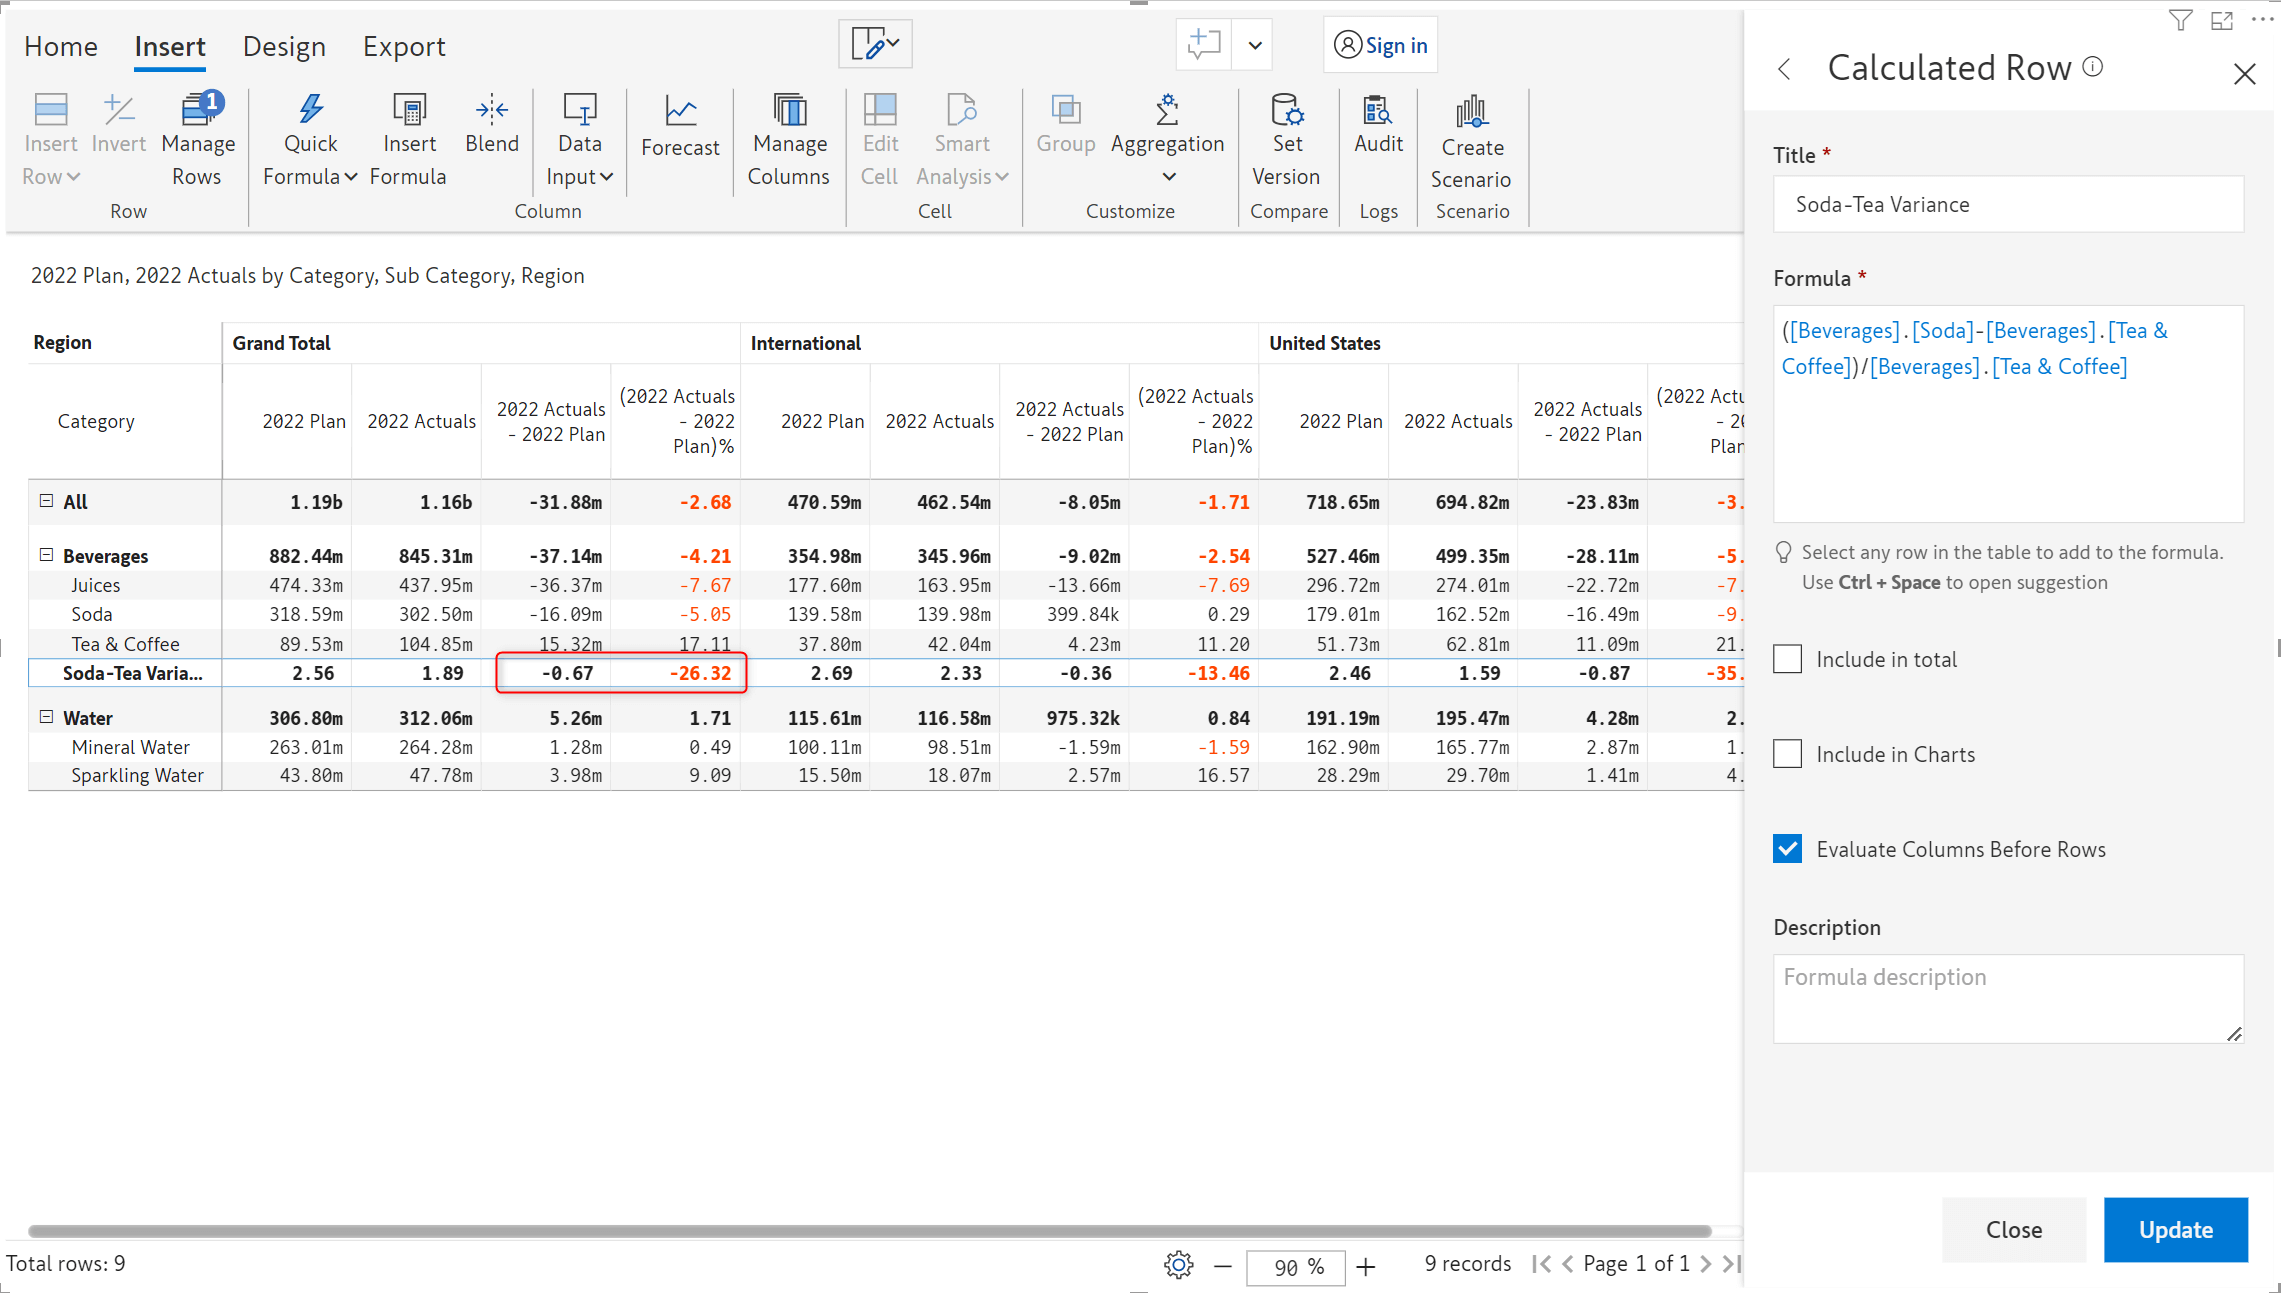 Evaluate columns before rows